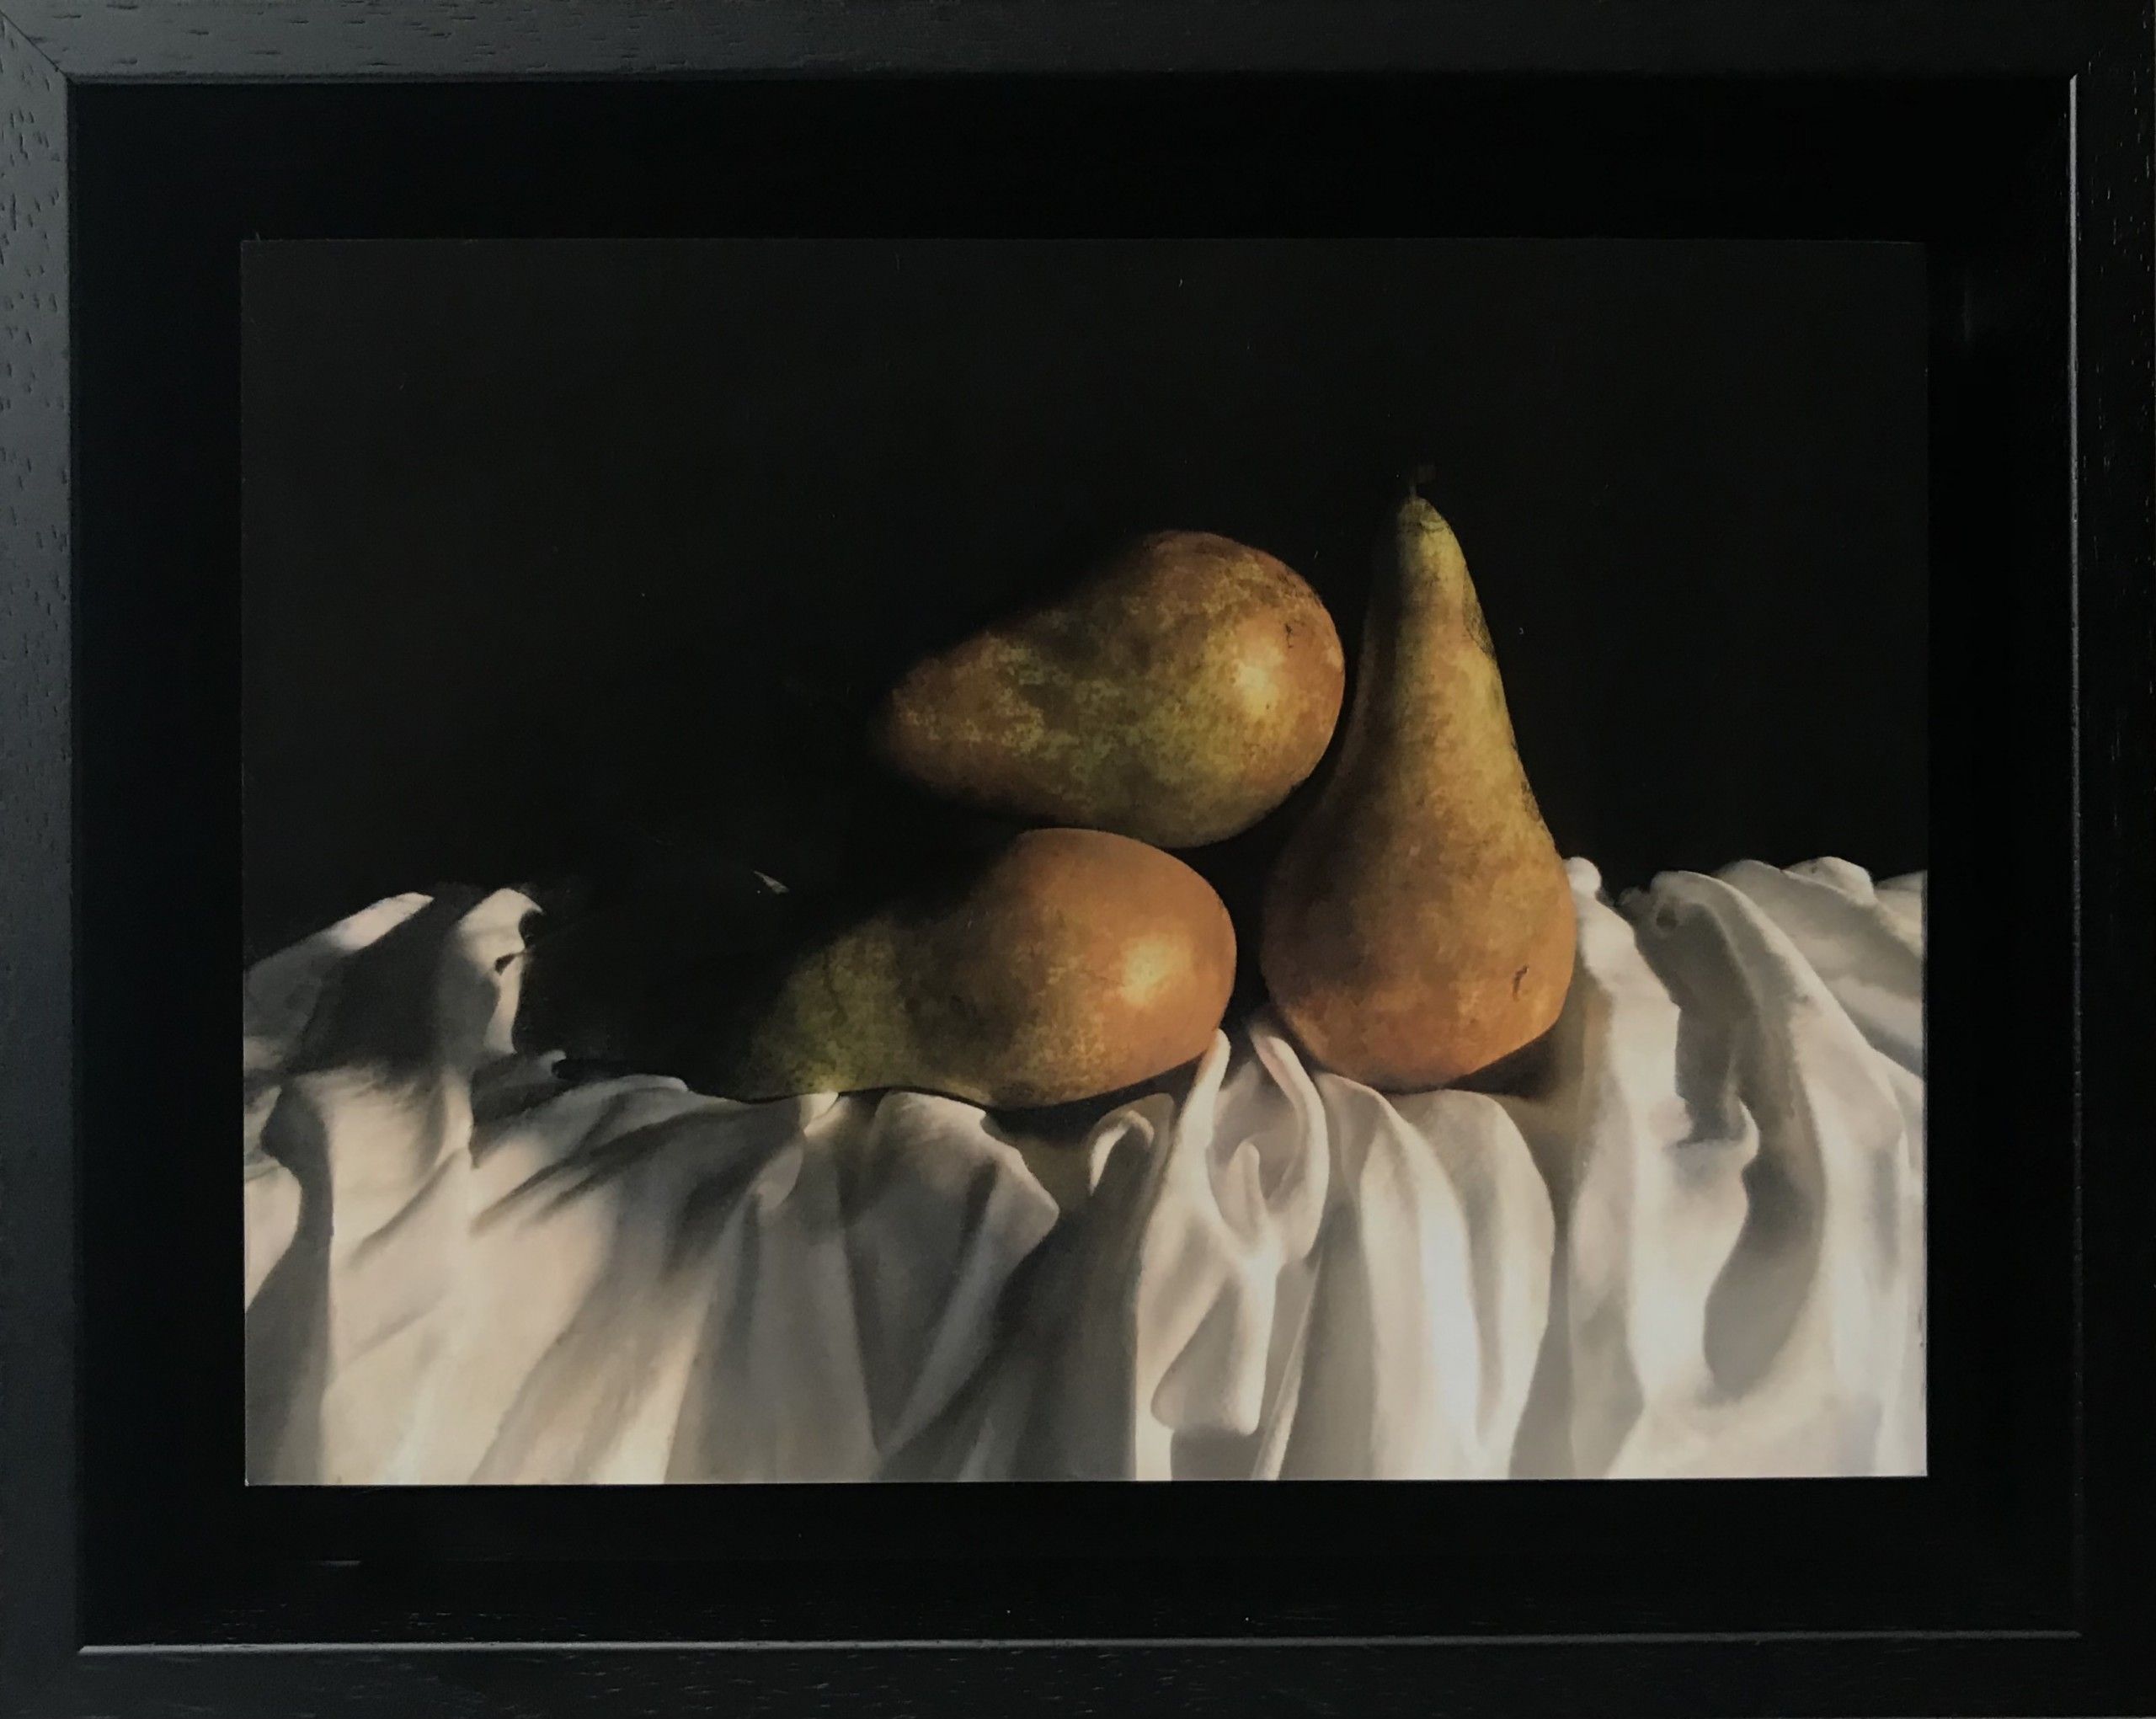 Conference Pears by Kate Verrion